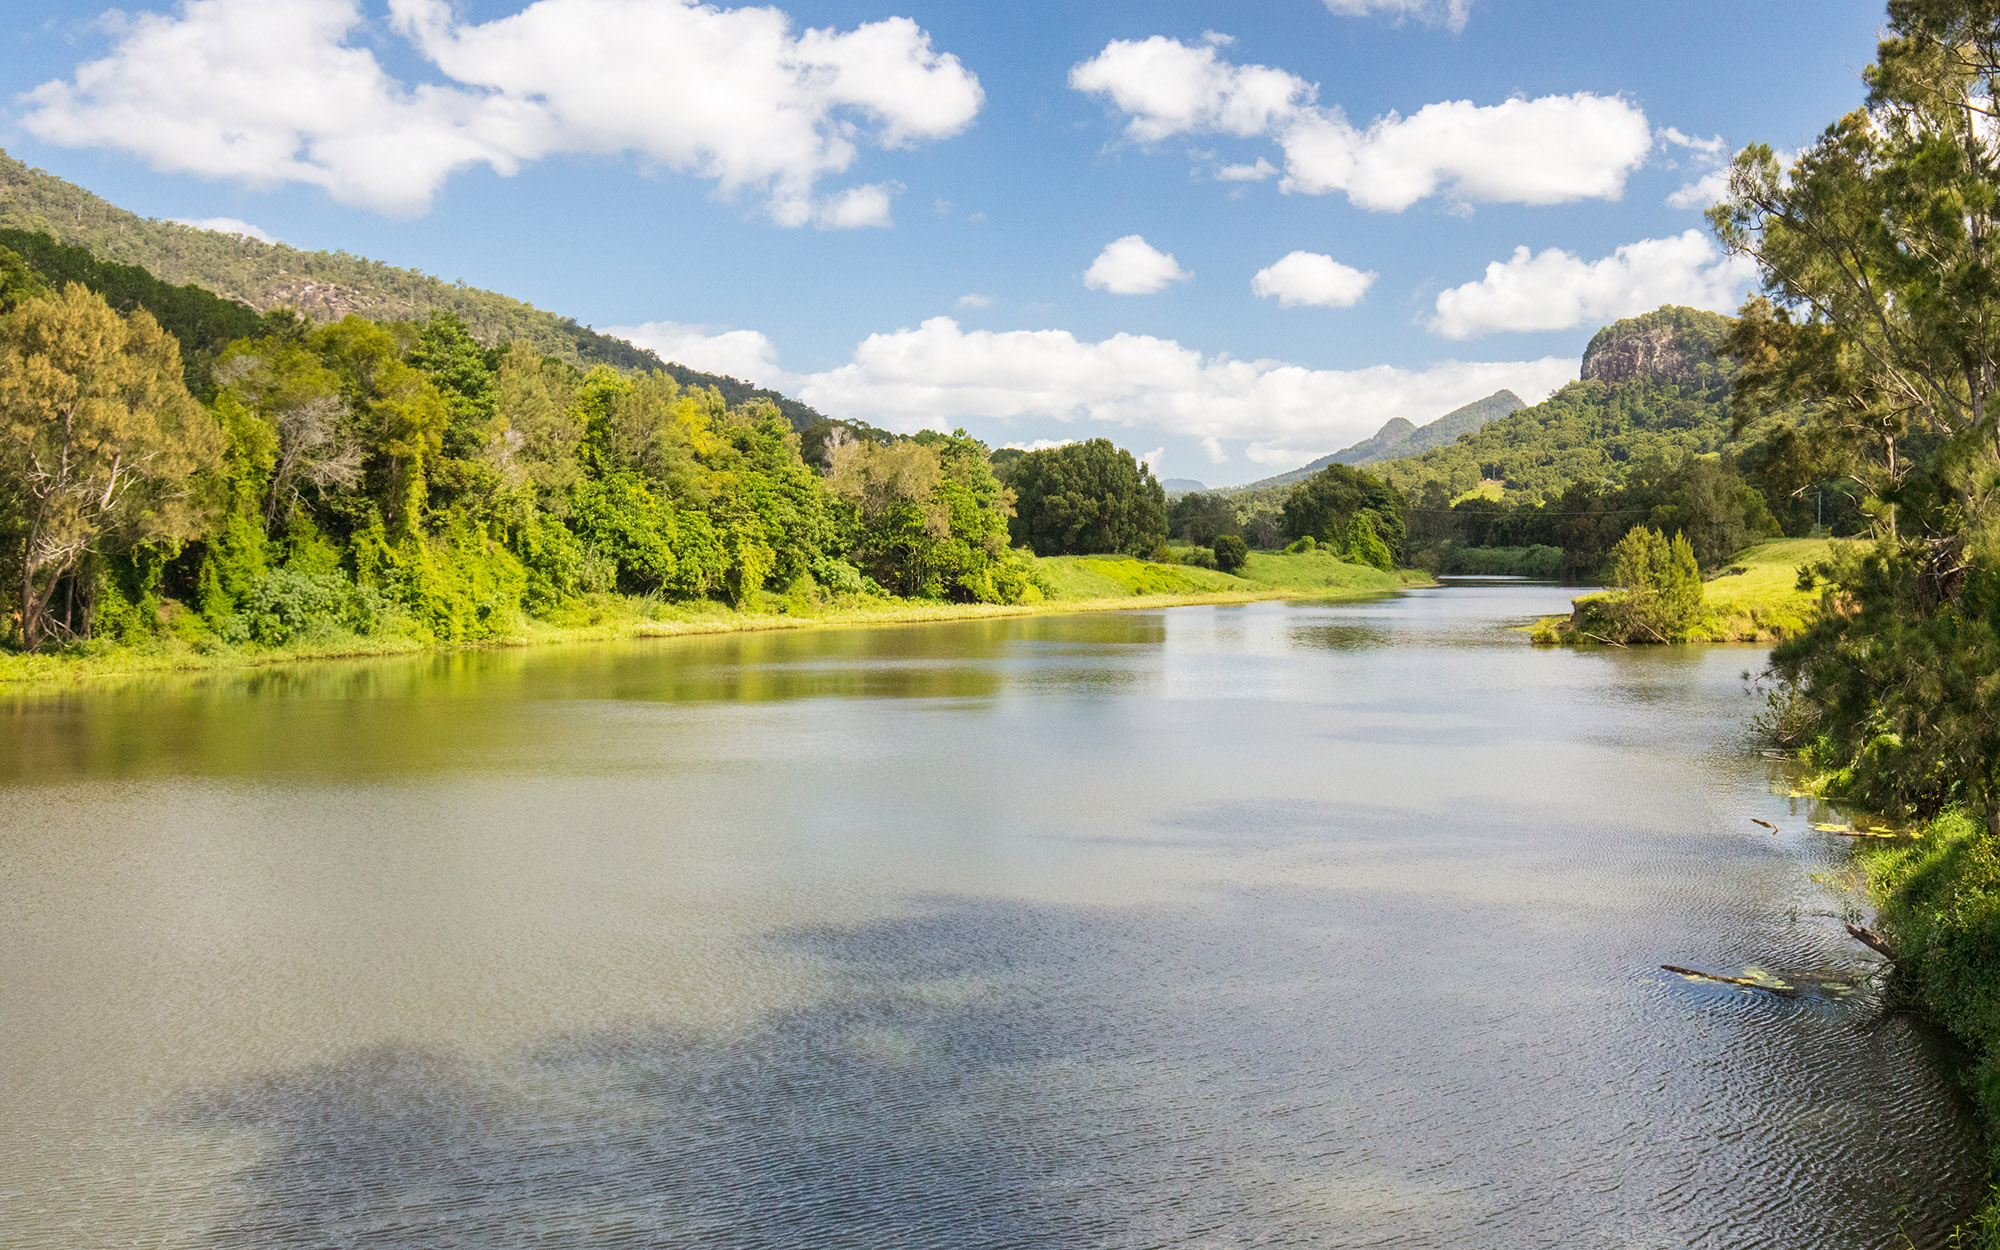 The Tweed River near Murwillumbah, New South Wales.